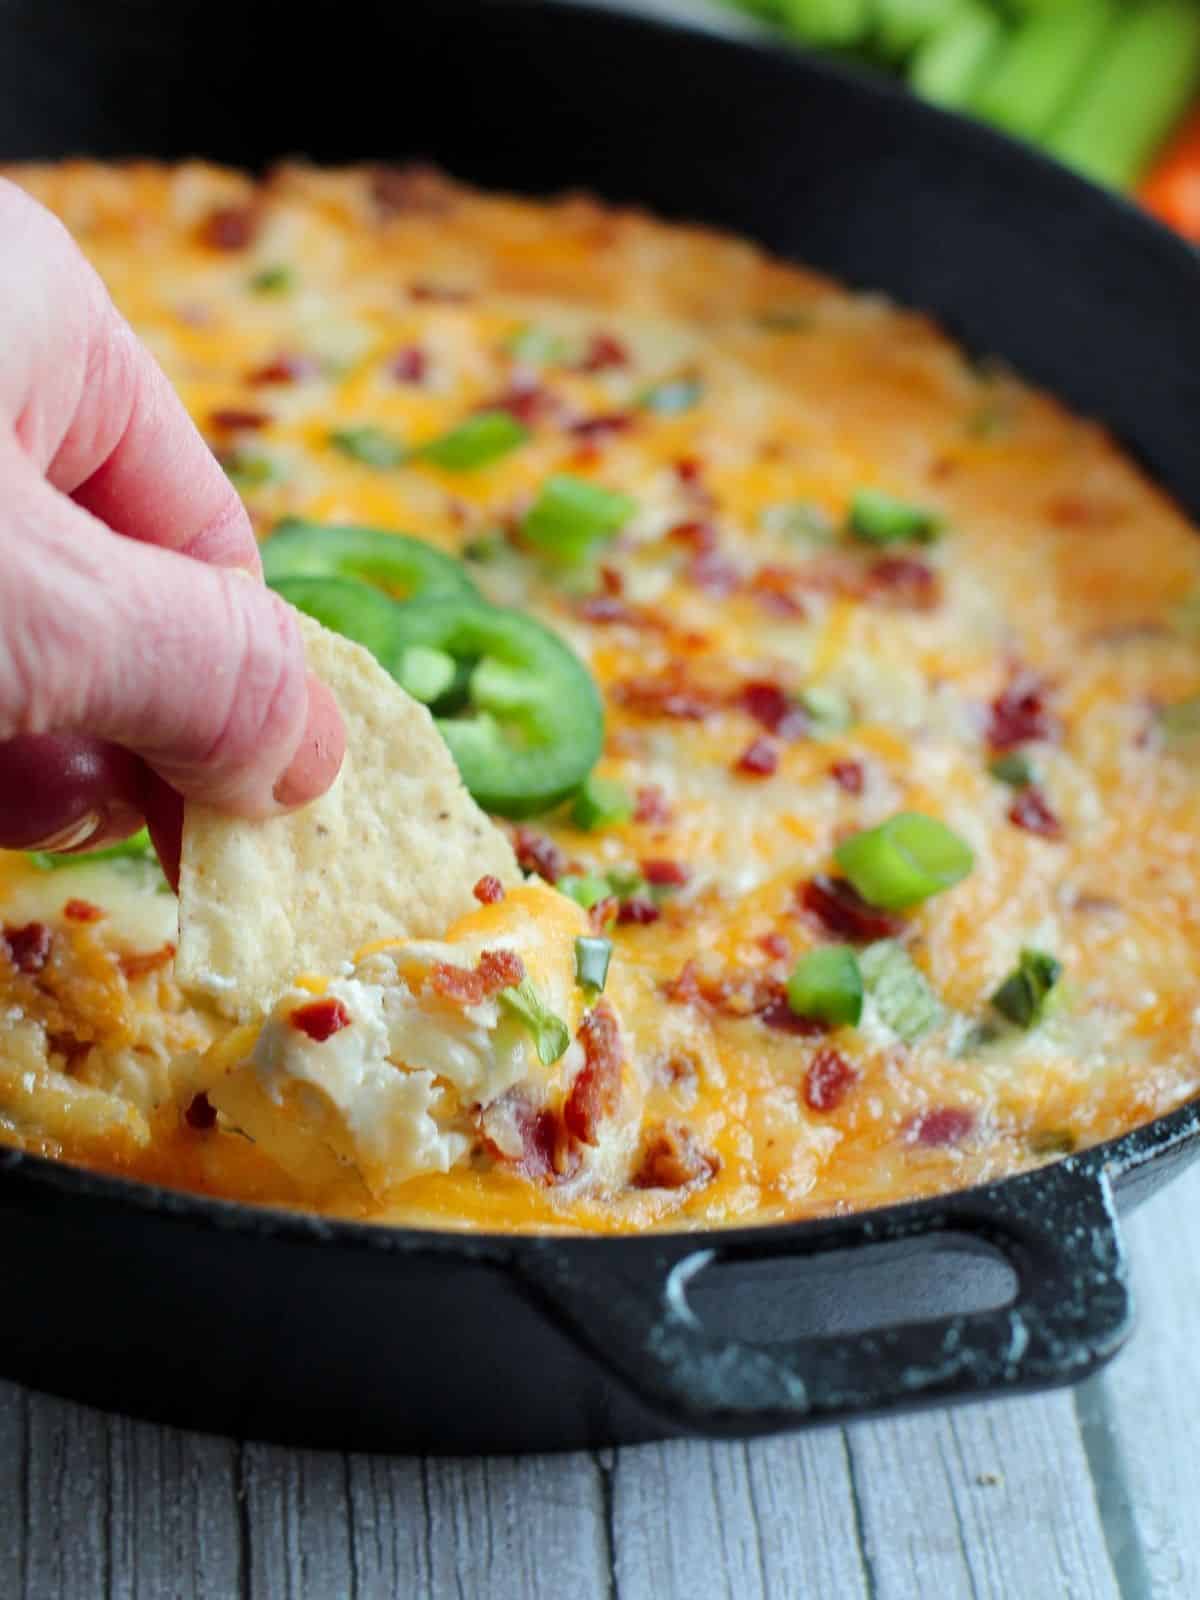 dipping chip into baked jalapeno dip.